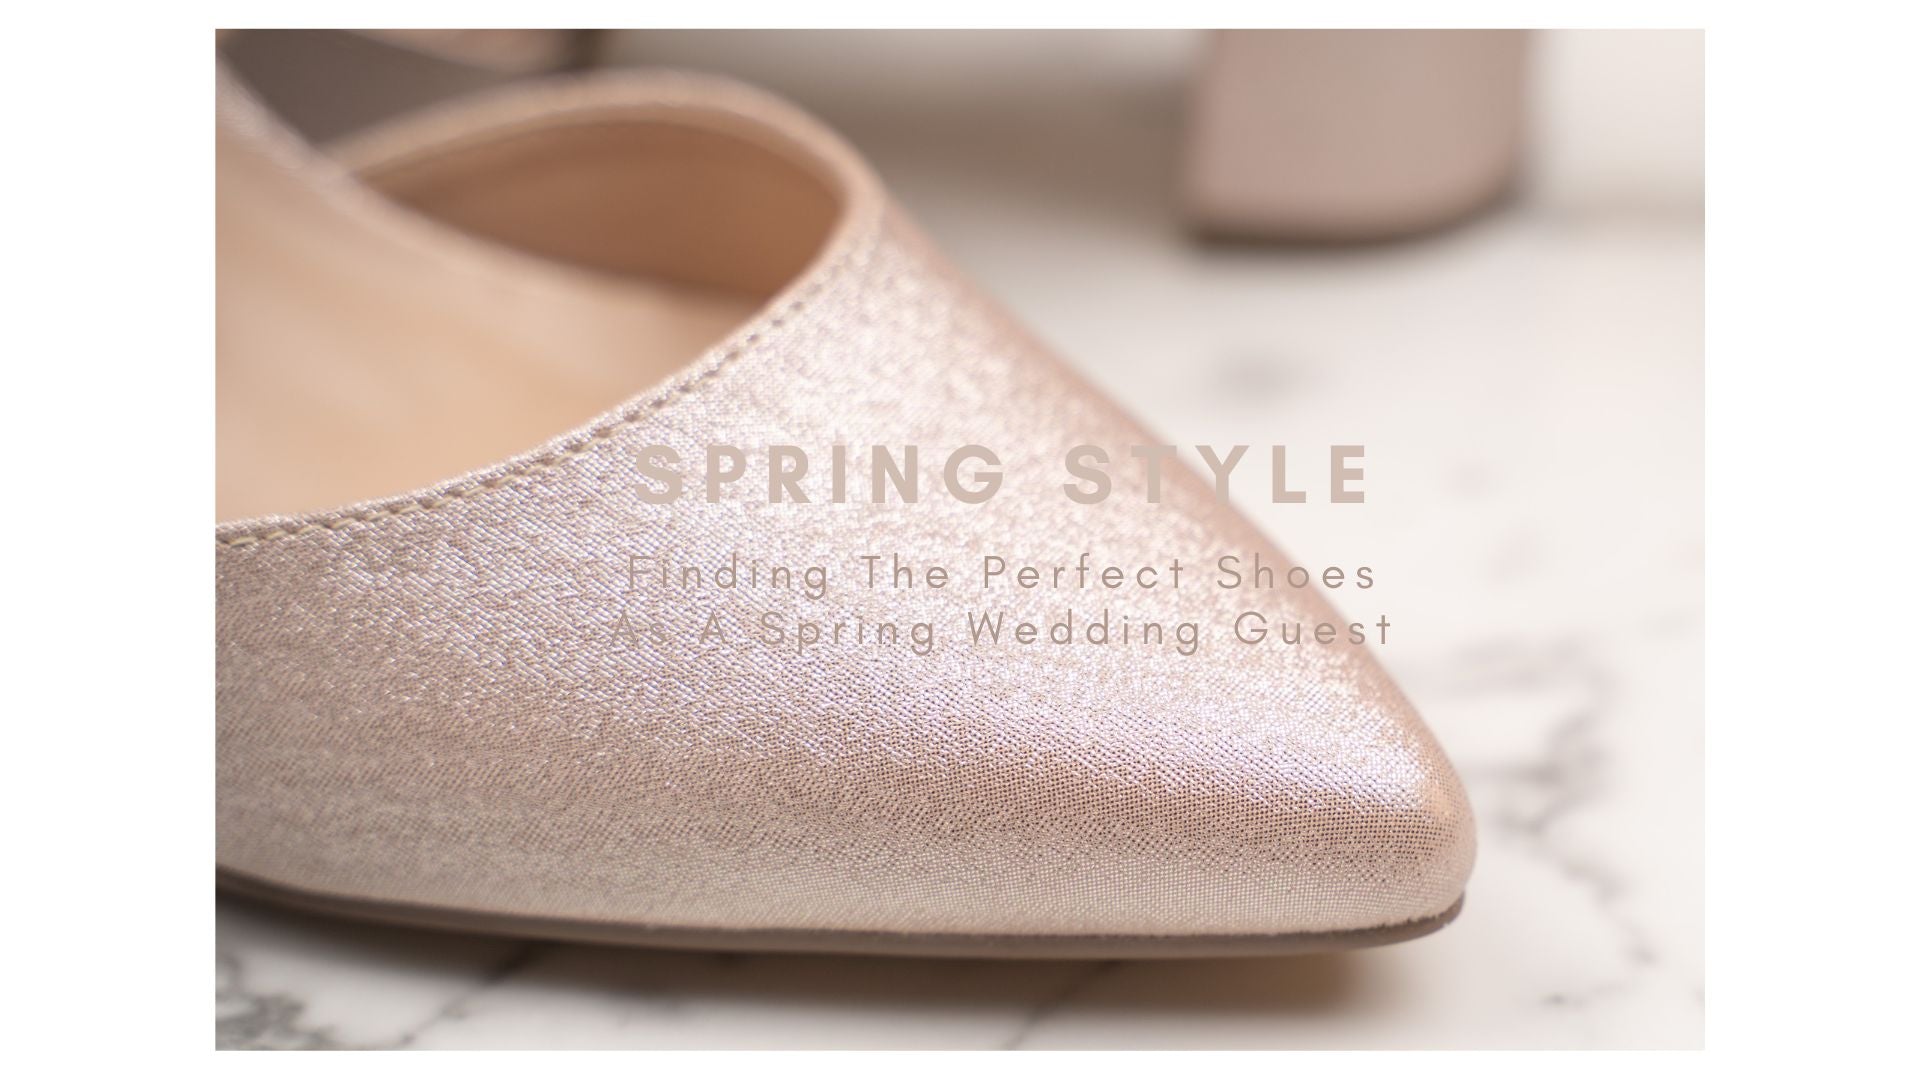 Finding The Right Shoes As A Spring Wedding Guest